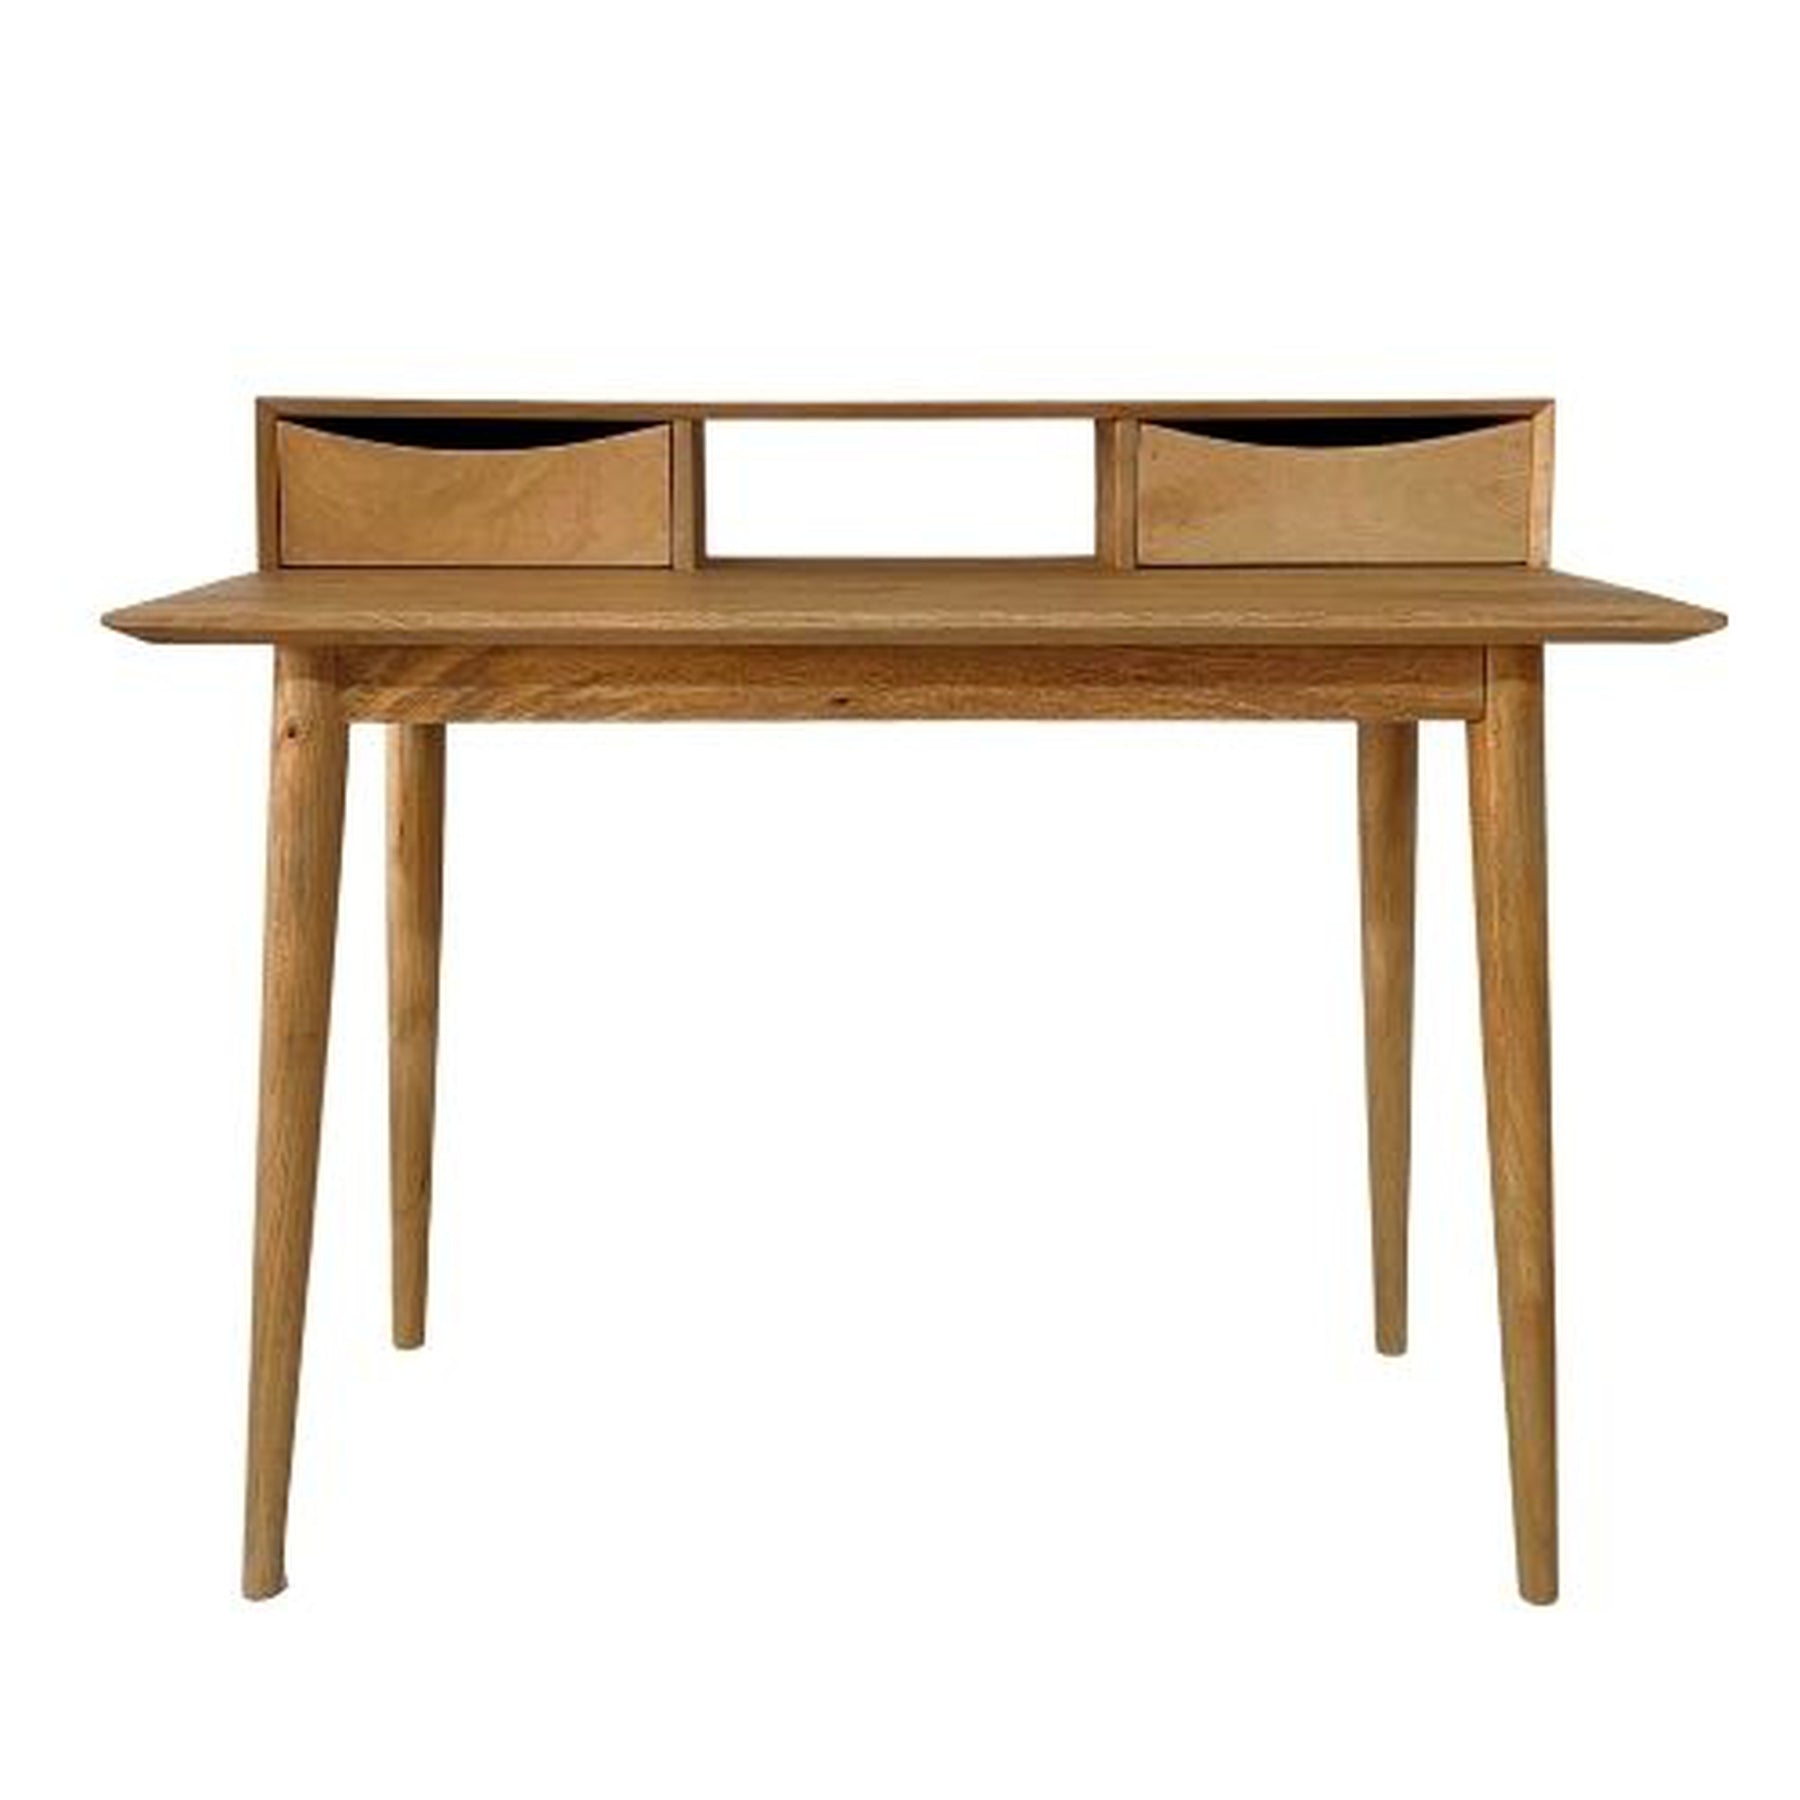 Wooden Retro Sixties Study Table | 46x24x35 inches